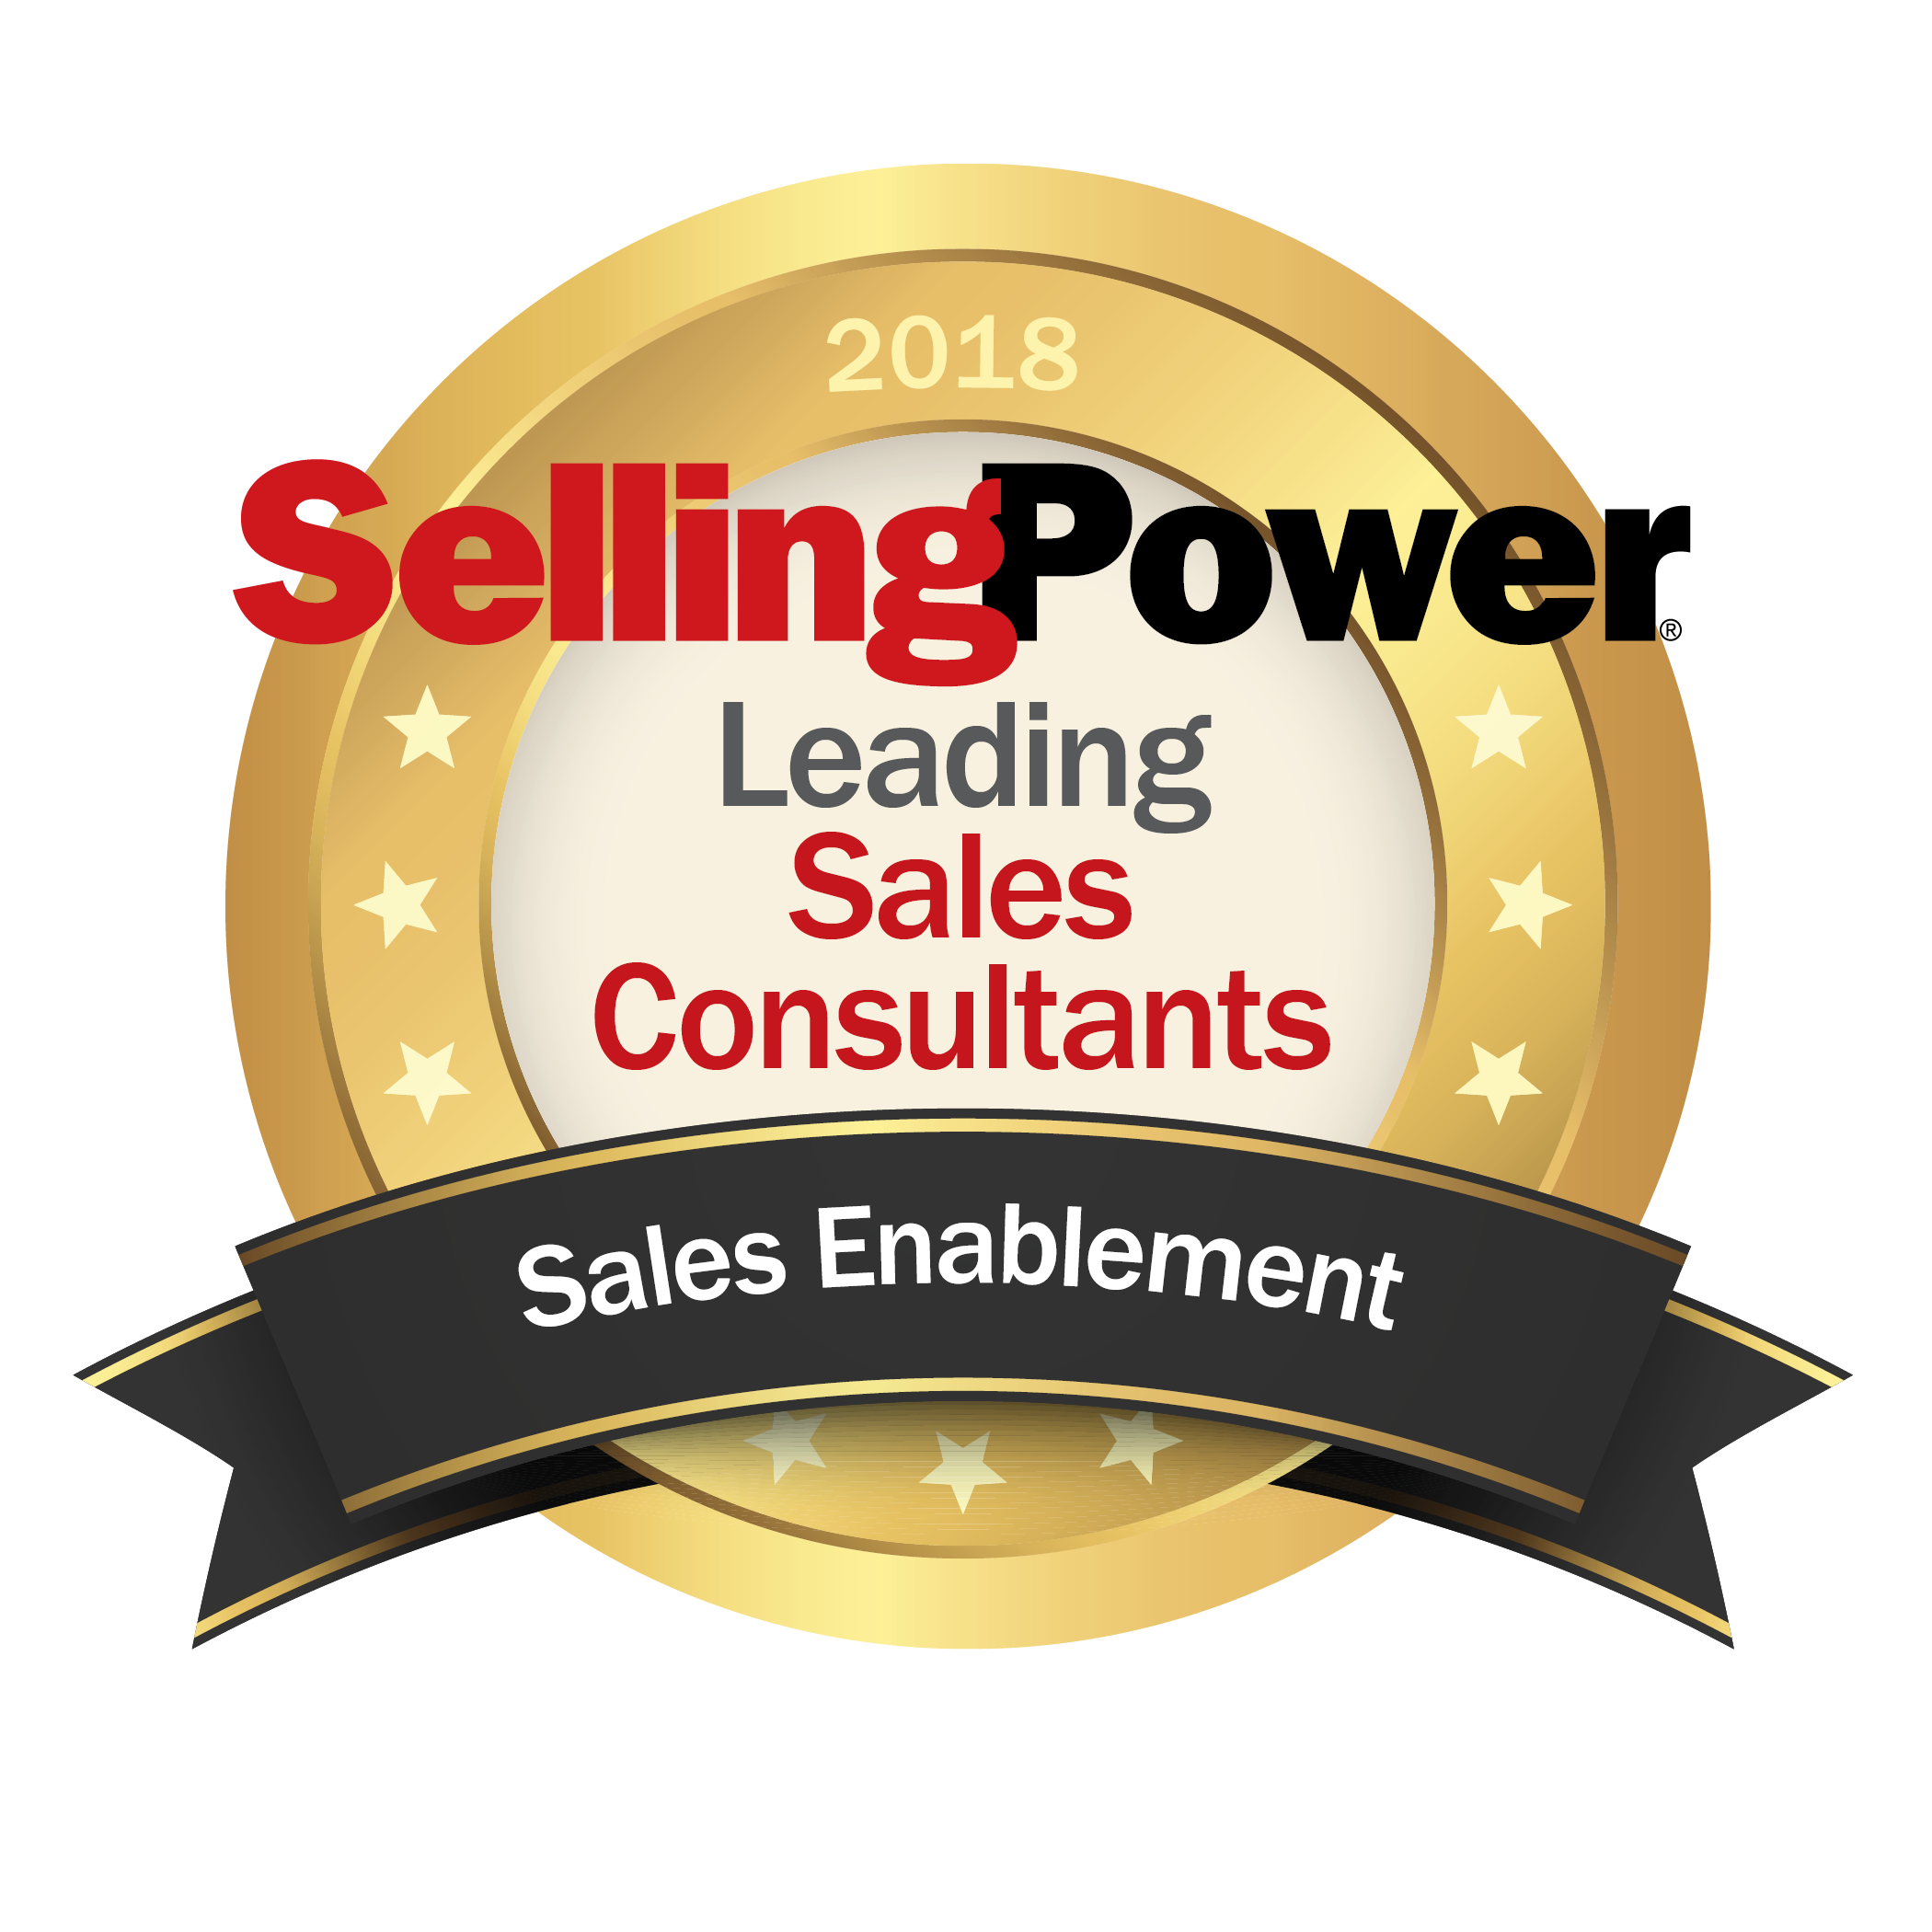 Leading Sales Consultants 2018 enable[1]